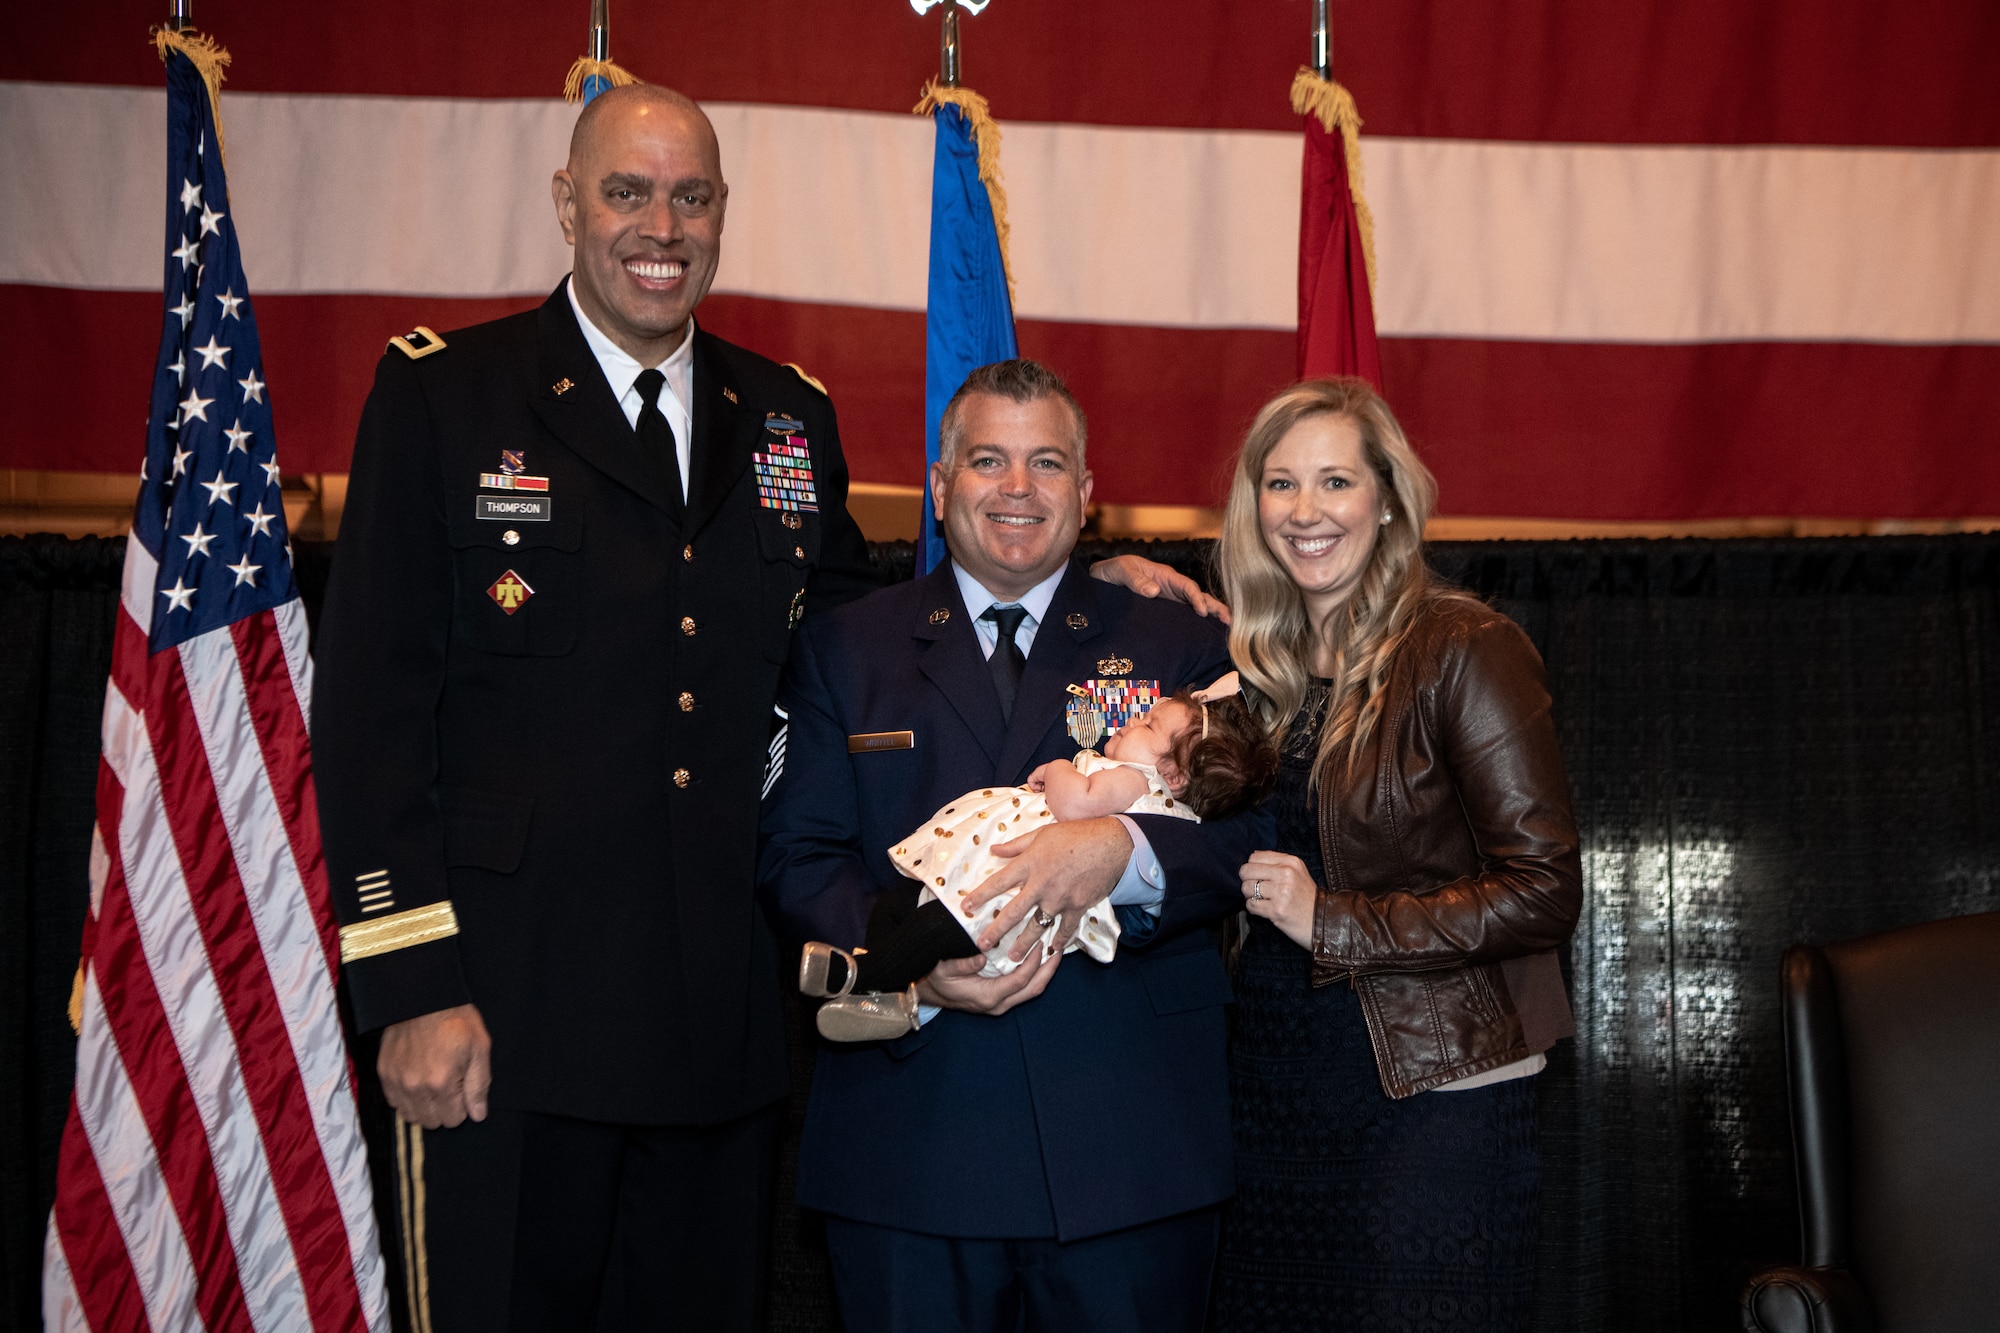 Master Sgt. Bryan Whittle, with the 205th Engineering and Installation Squadron, poses with Maj. Gen. Michael C. Thompson, adjutant general for Oklahoma, and his wife Shannon Whittle, after receiving the Airman’s Medal in a ceremony at Will Rogers Air National Guard Base in Oklahoma City, Dec. 8, 2019. The Airman’s Medal is the highest noncombat award given in the Air Force and awarded to service members who distinguish themselves by a heroic act, usually at the voluntary risk of their own life. (U.S. Air National Guard photo by Staff Sgt. Jordan Martin)